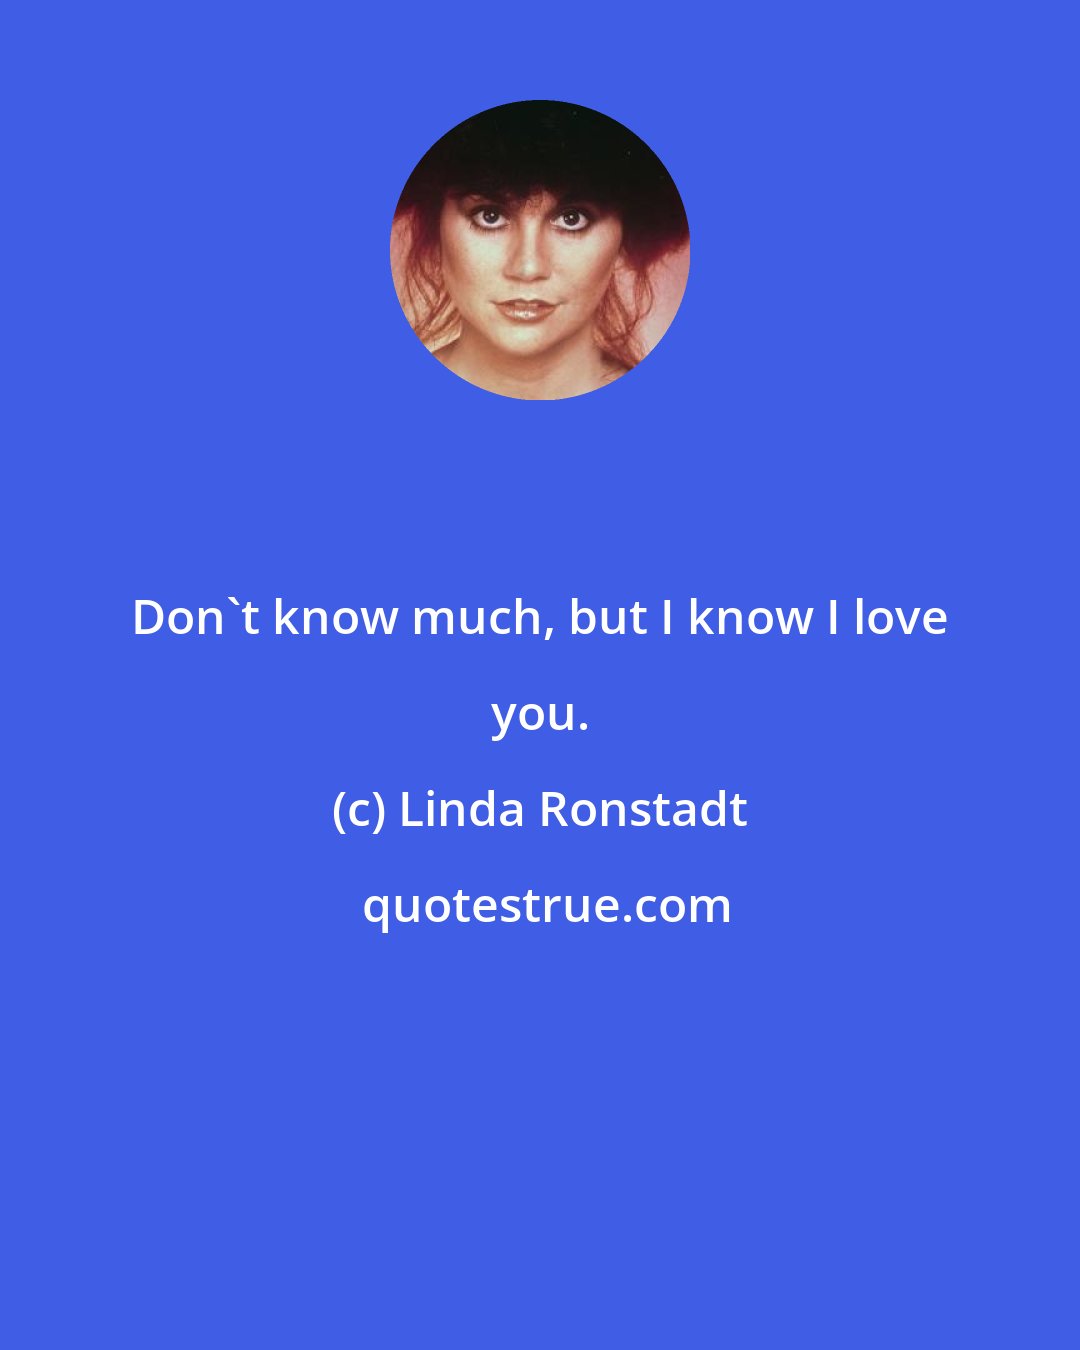 Linda Ronstadt: Don't know much, but I know I love you.